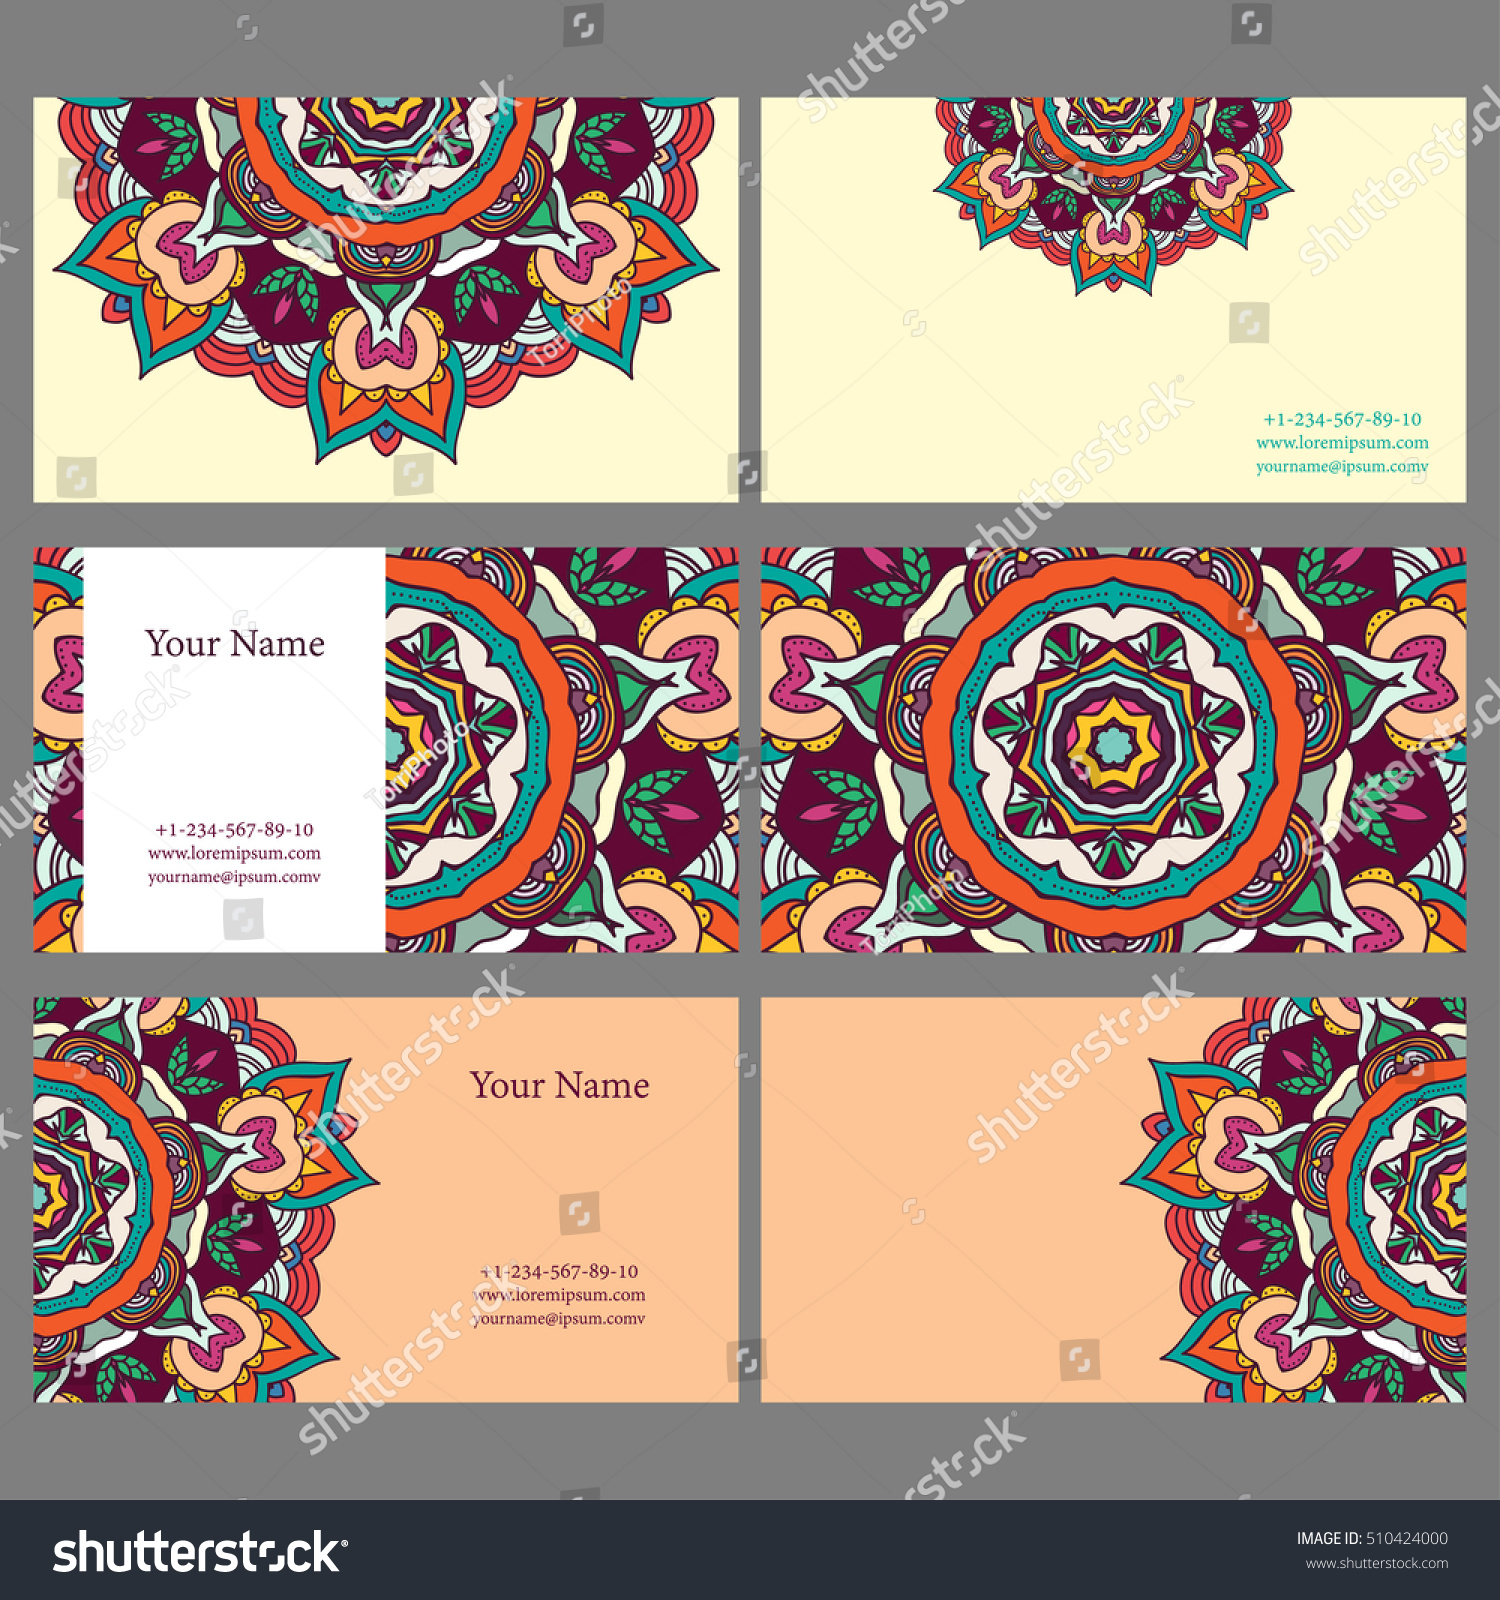 https://www.shutterstock.com/pic-510424000/stock-vector-set-of-colorful-business-cards-with-abstract-mandala-design-vector-illustration-eps-8.html